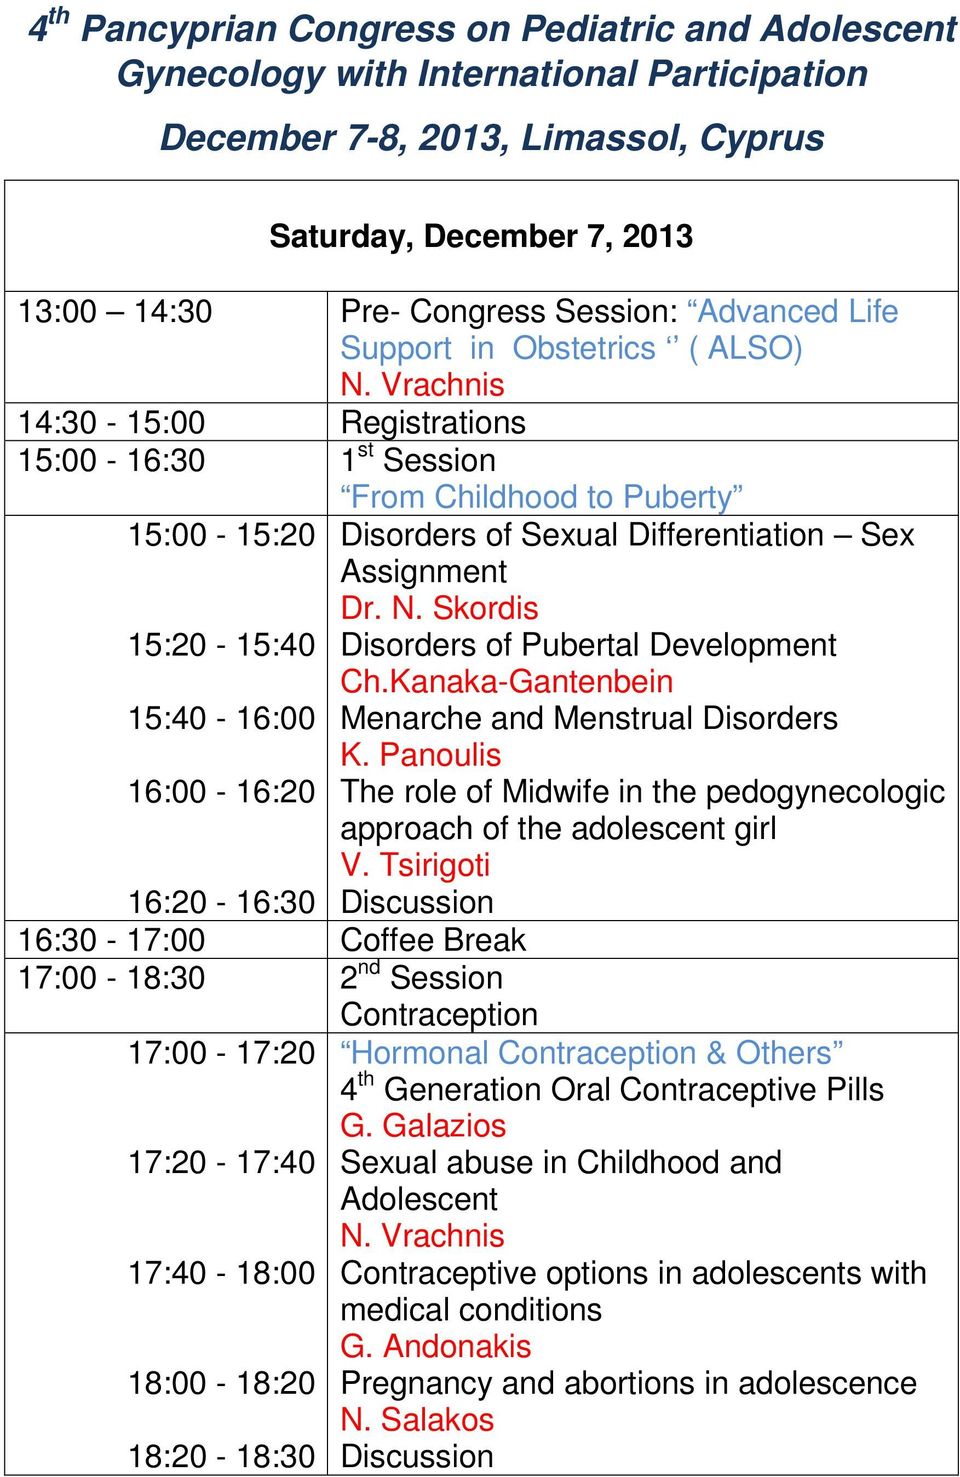 Vrachnis 14:30-15:00 Registrations 15:00-16:30 1 st Session From Childhood to Puberty 15:00-15:20 15:20-15:40 15:40-16:00 16:00-16:20 16:20-16:30 16:30-17:00 Coffee Break 17:00-18:30 2 nd Session